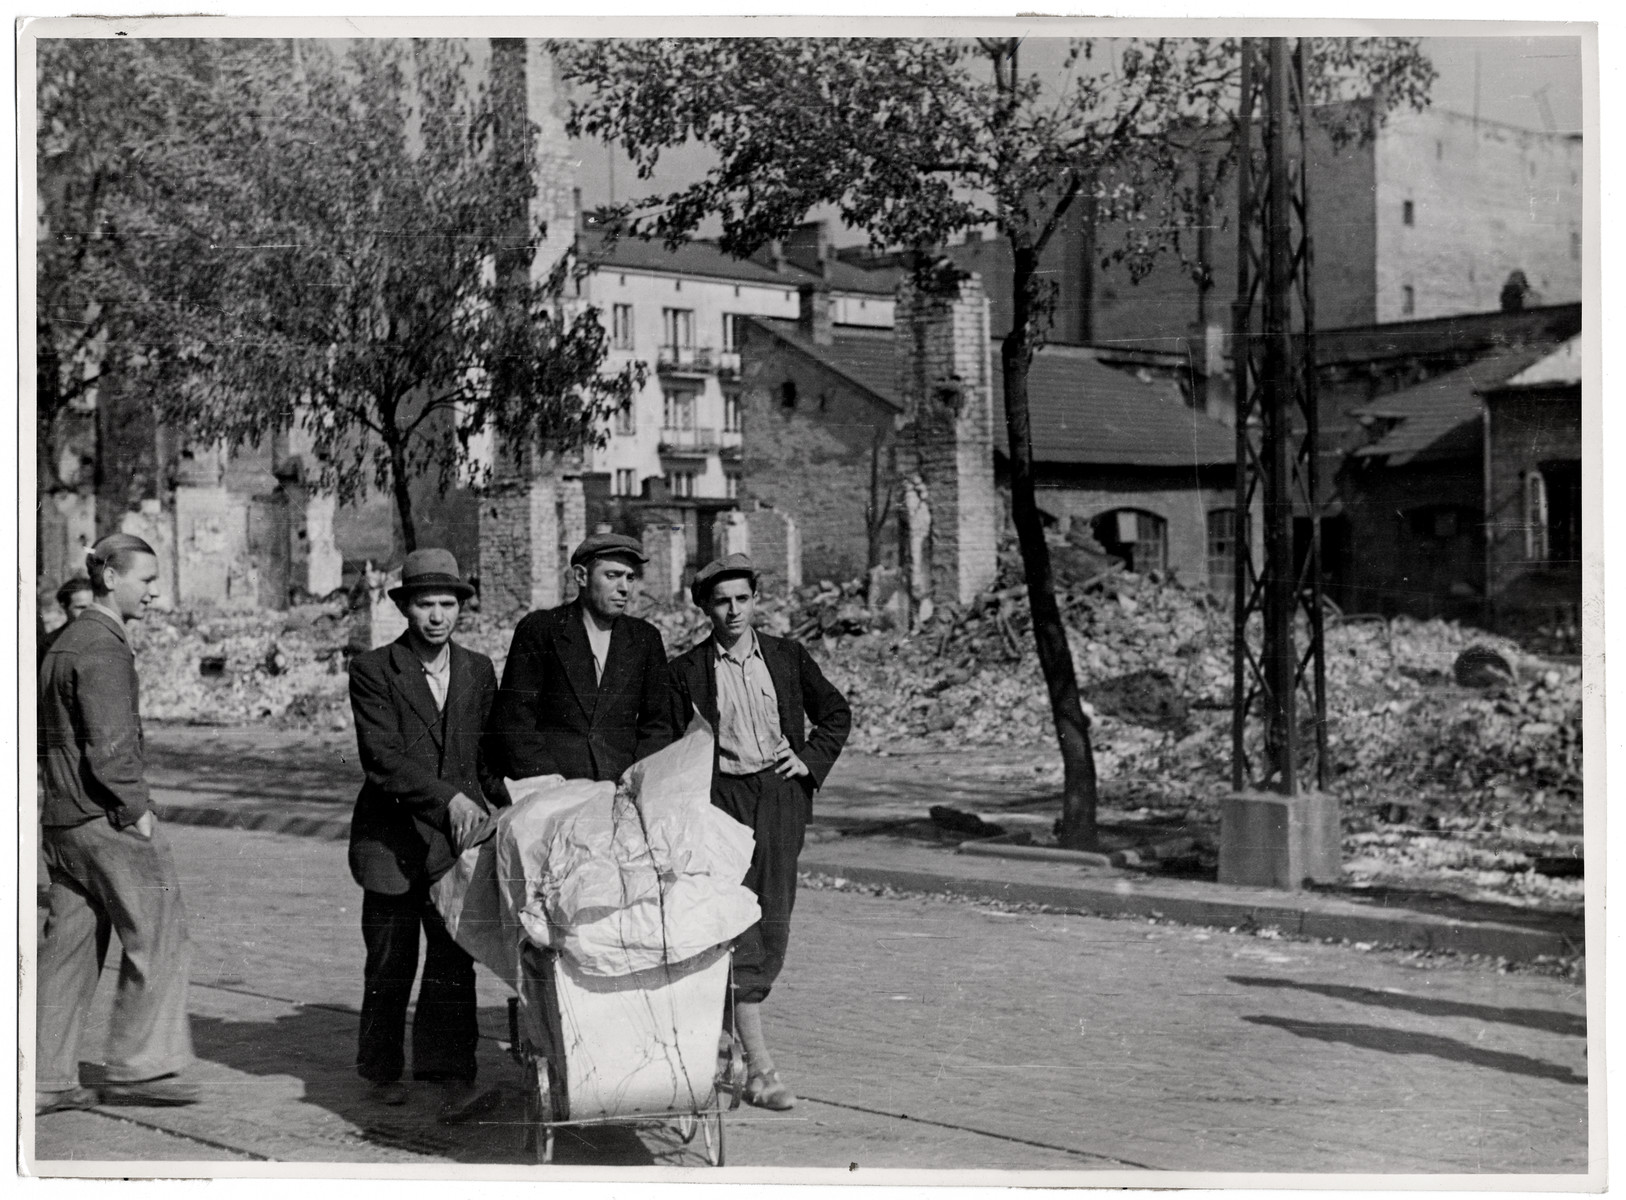 Polish men wheel a baby carraige full of supplies through the besieged city of Warsaw.